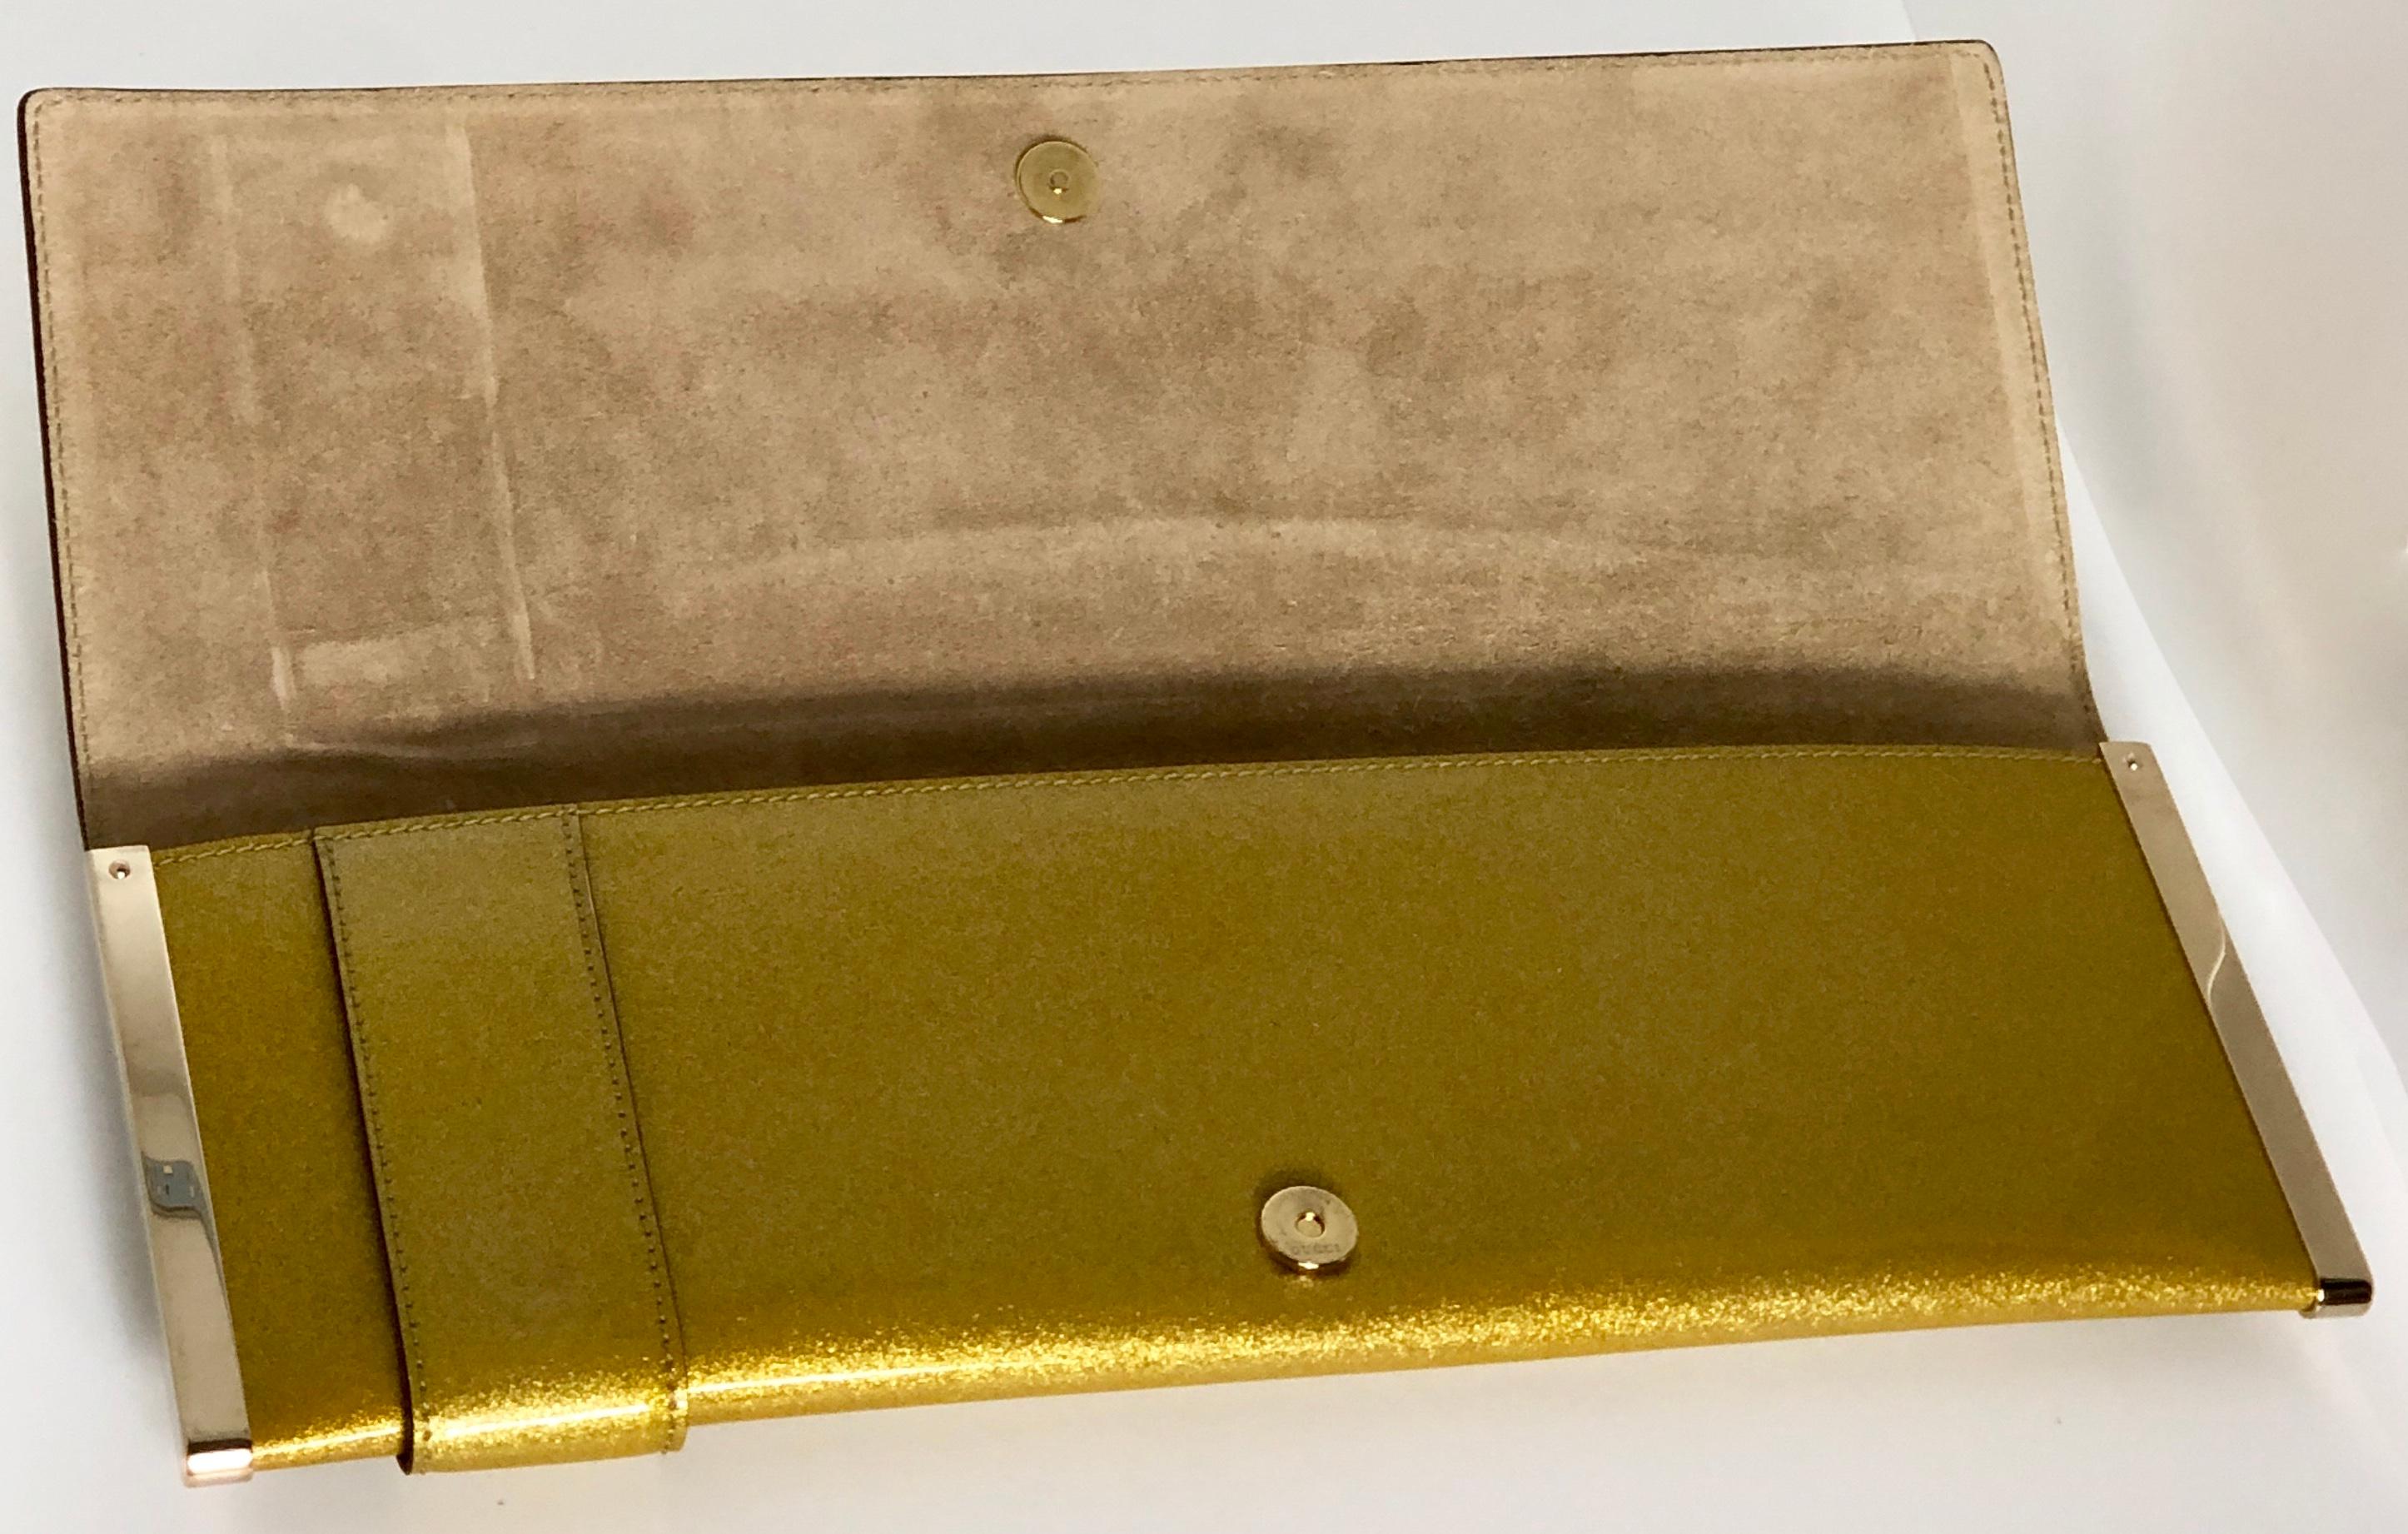 Gucci Iridescent Gold Patent Leather Elongated Clutch with Gold Metal Accents For Sale 9